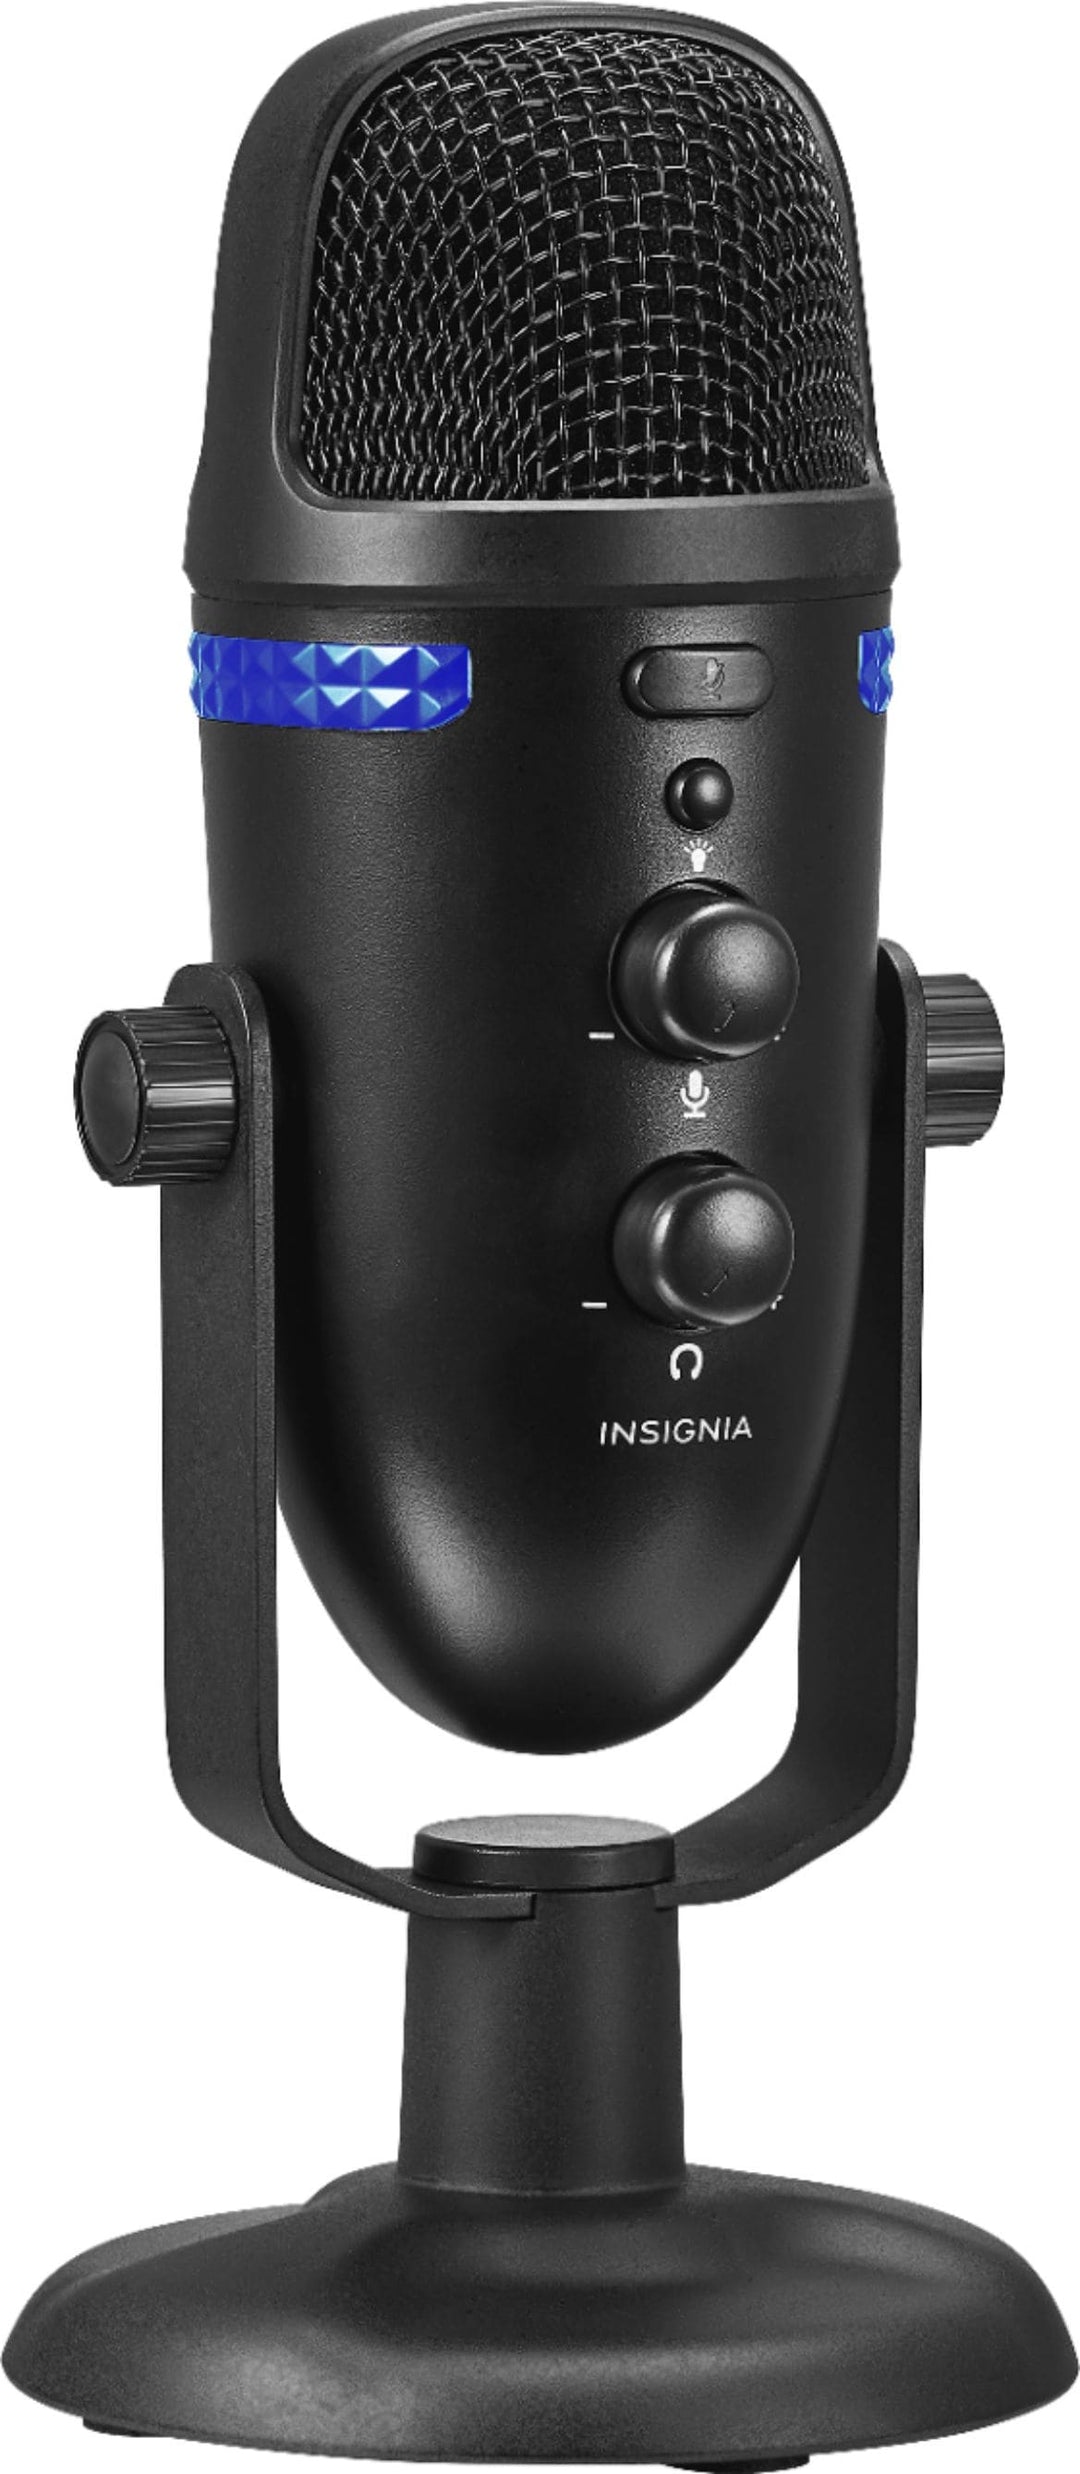 Insignia™ - Wired Cardioid & Omnidirectional USB Microphone_3